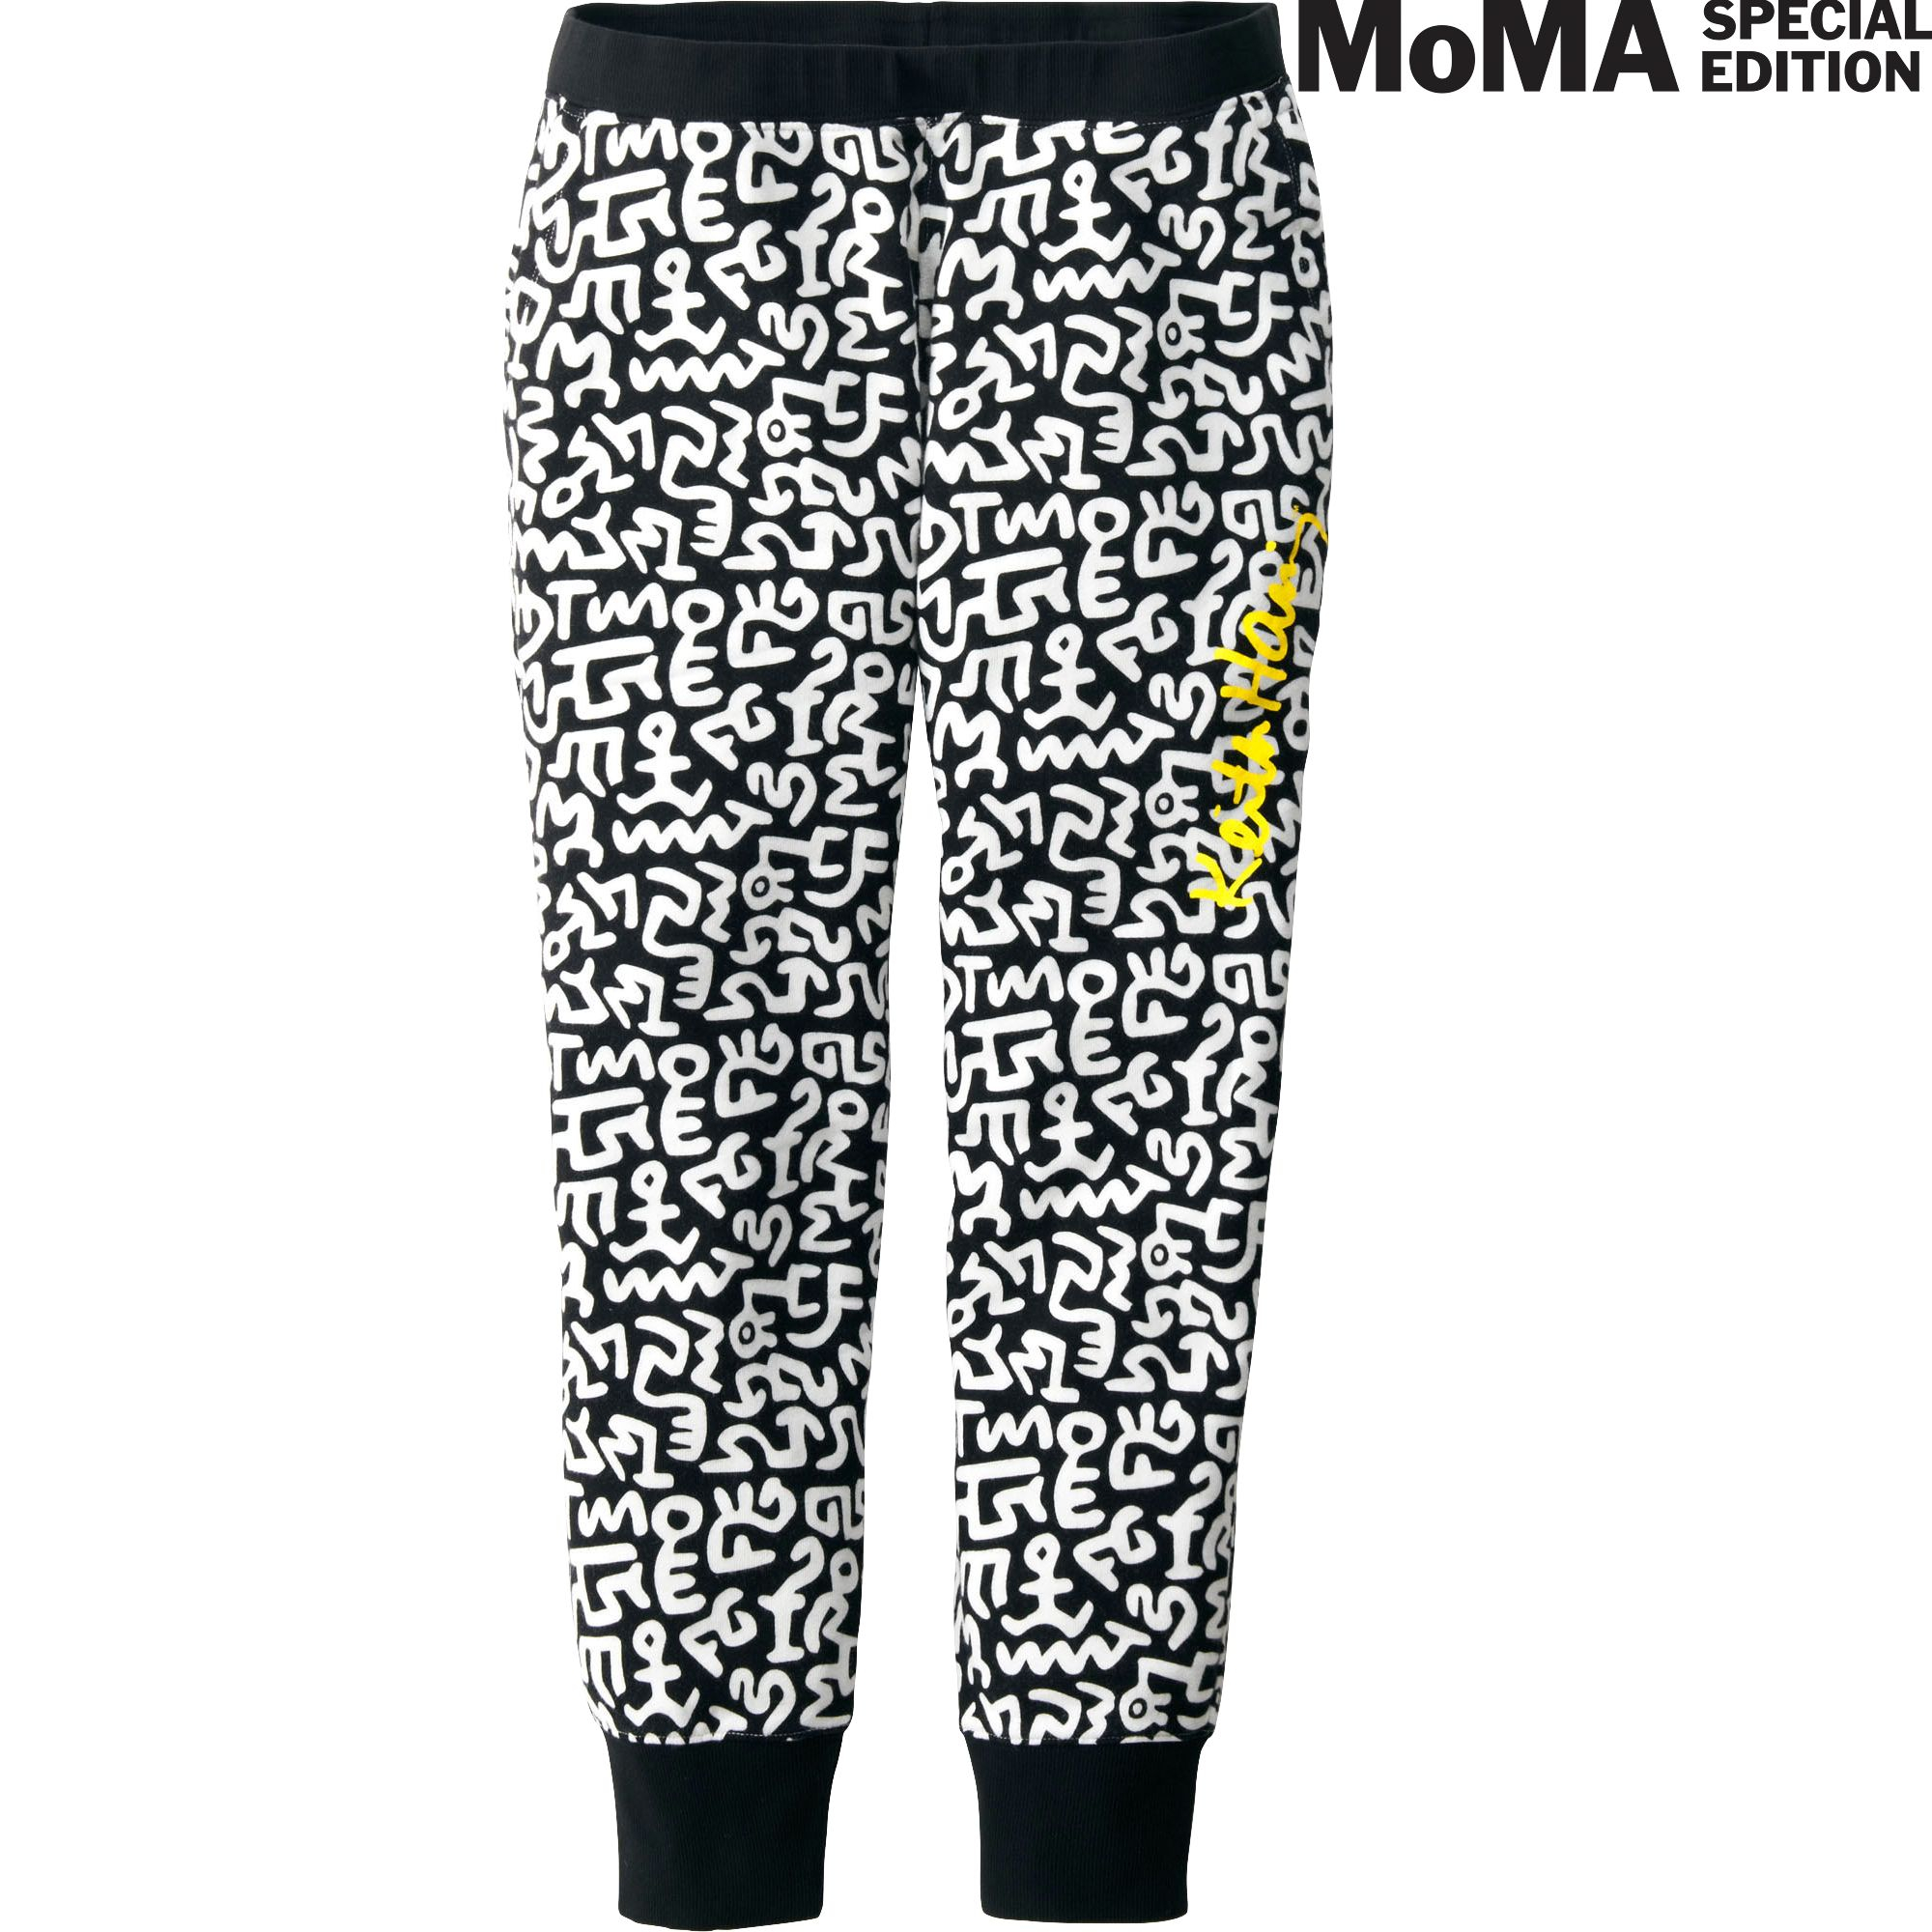 Uniqlo Sprz Ny Sweat Cropped Trousers (Keith Haring) in Black | Lyst